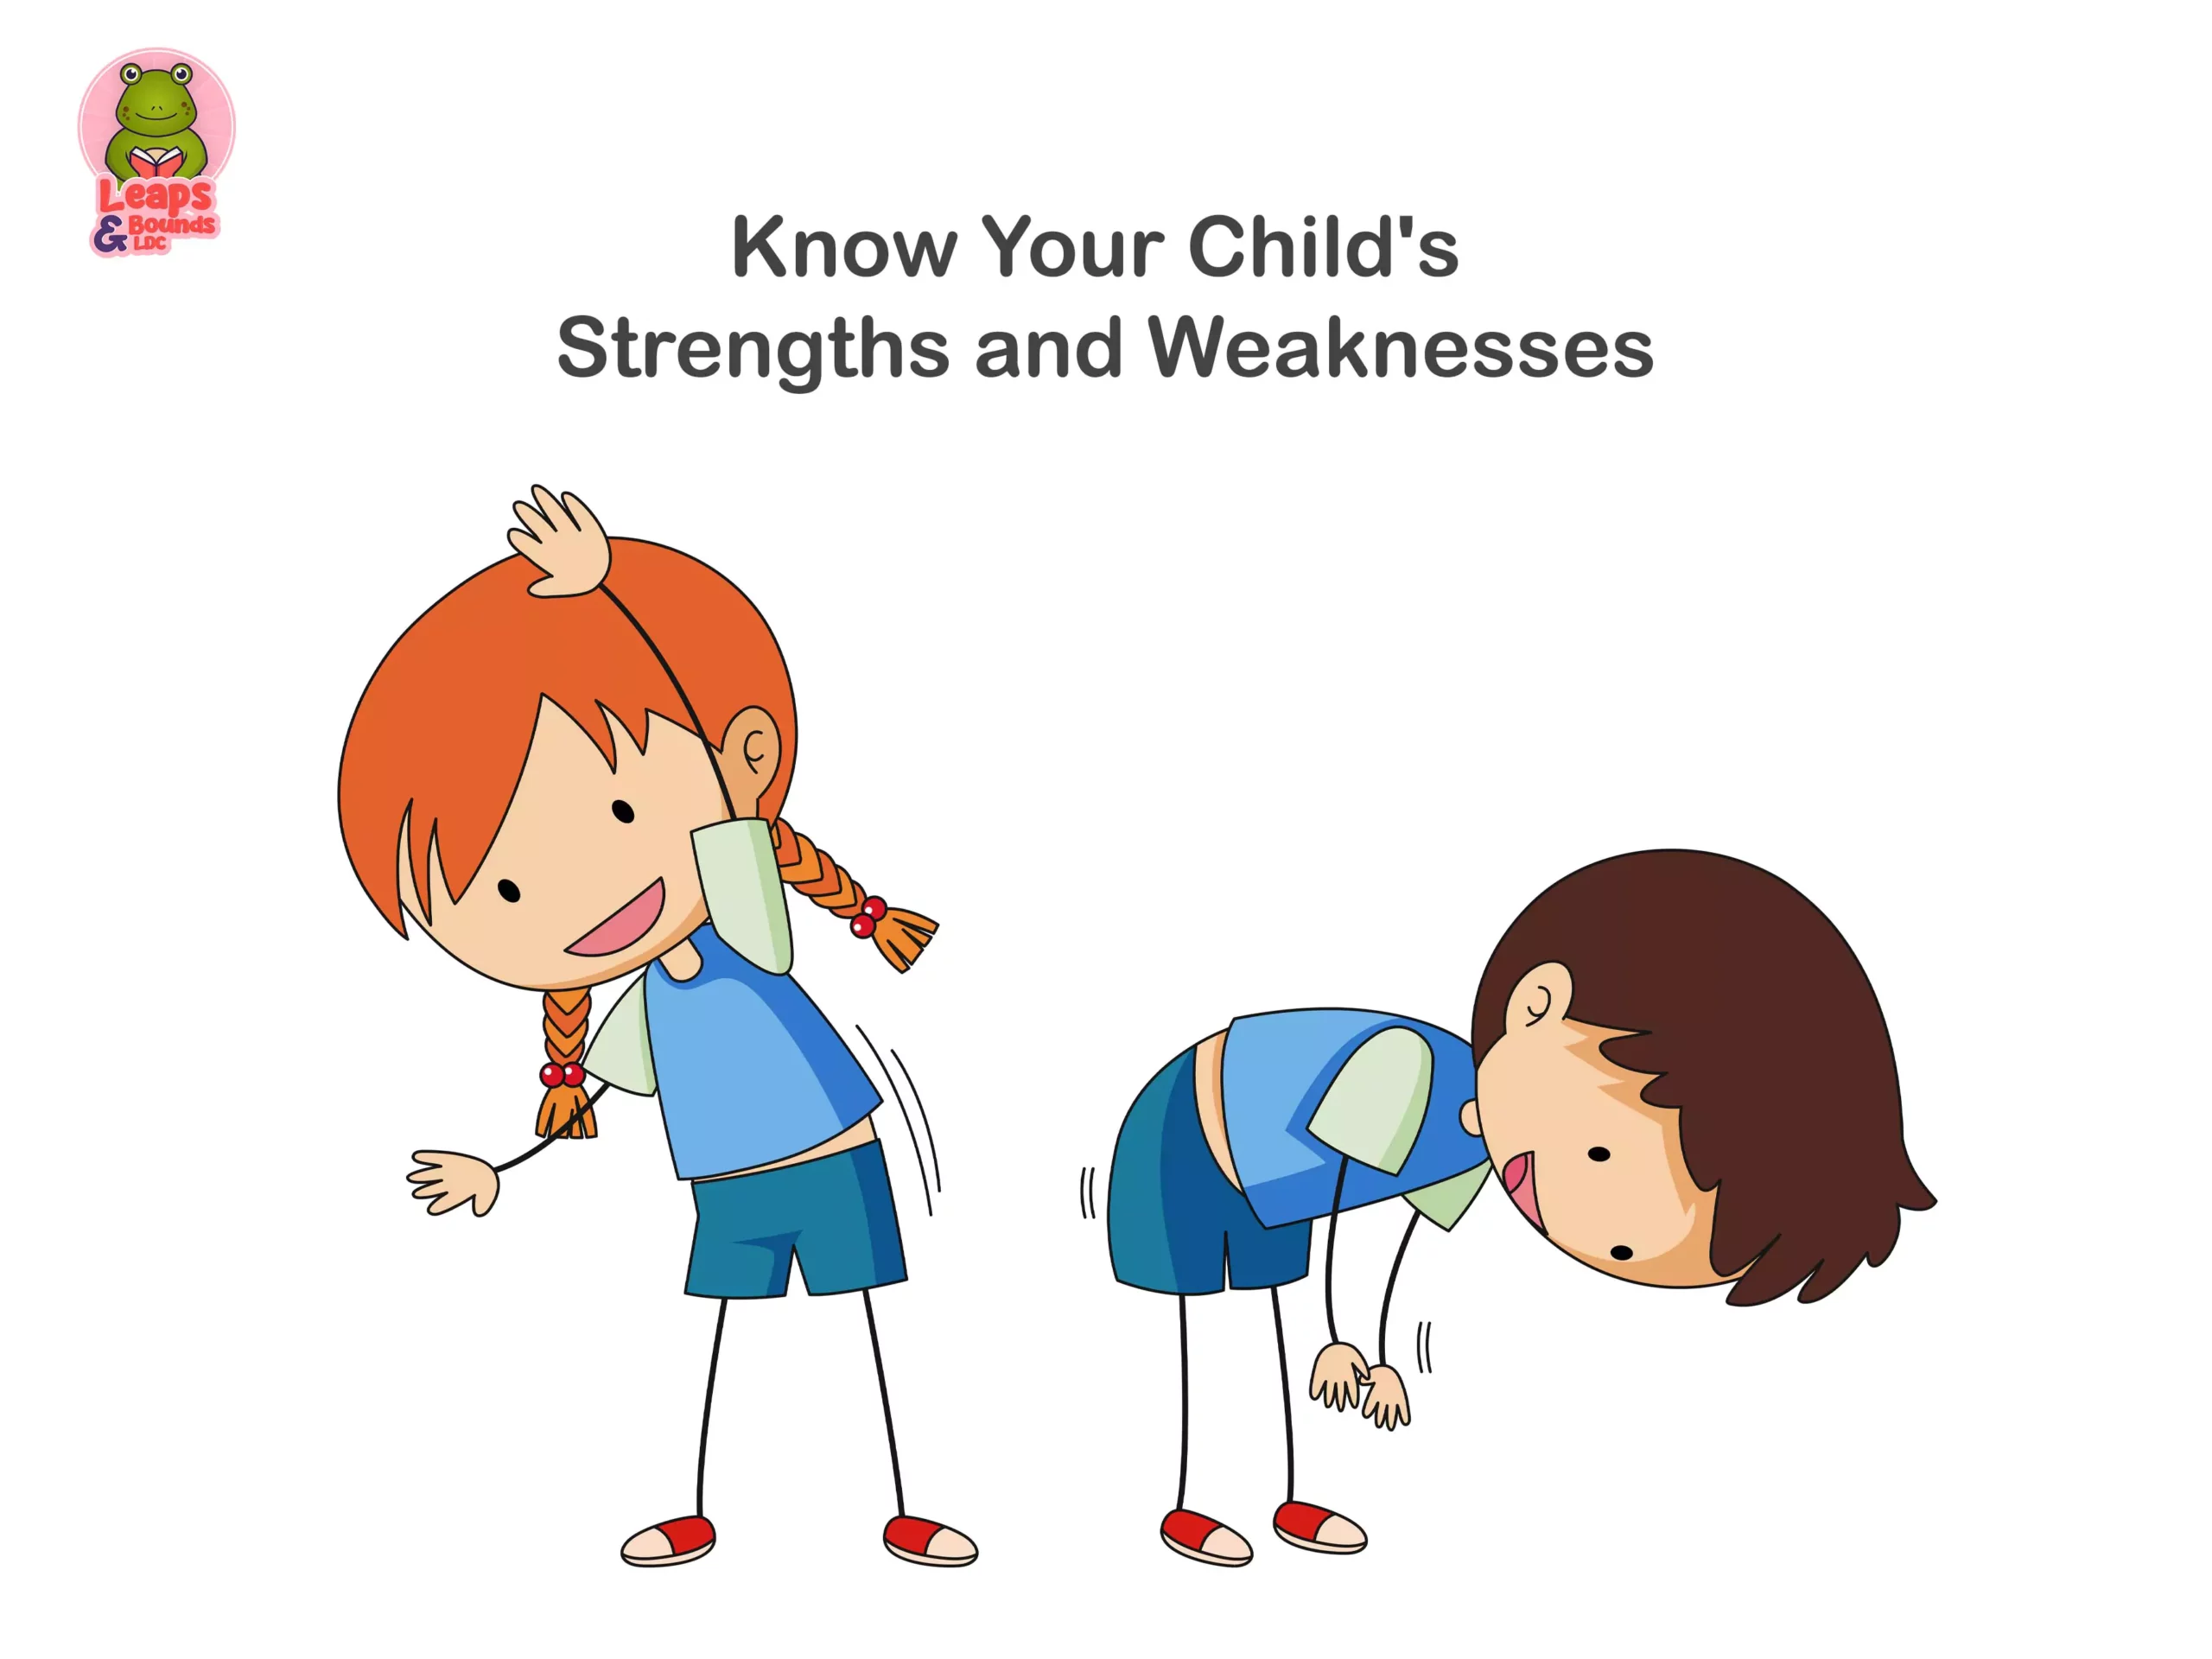 Know Your Child's Strengths and Weaknesses